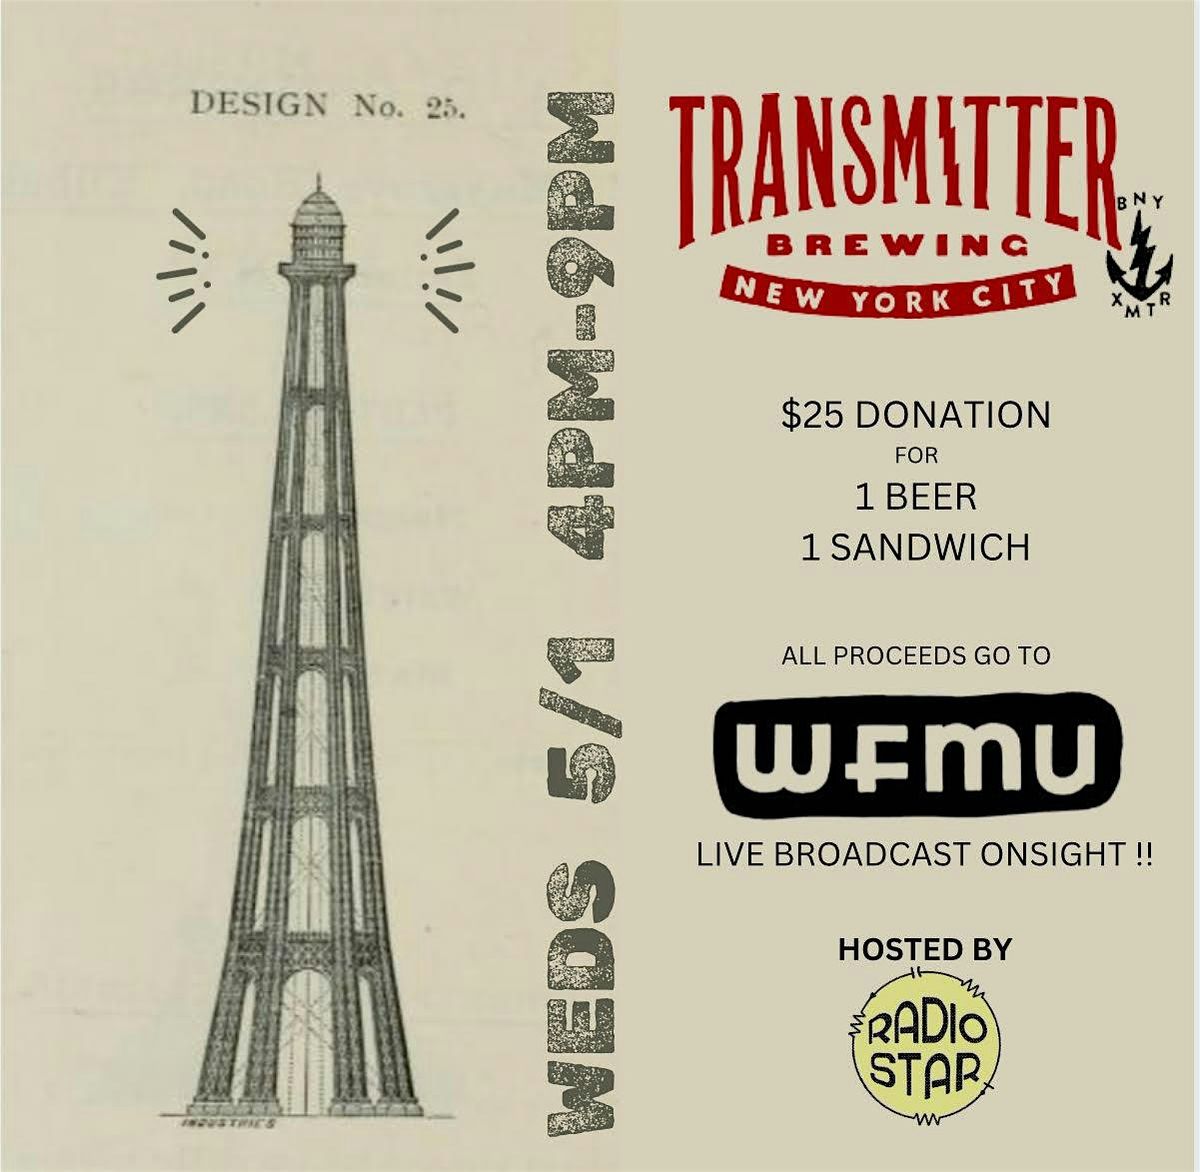 Transmitter Brewery and Radio Star's Beer & Sandwich Benefit for WFMU